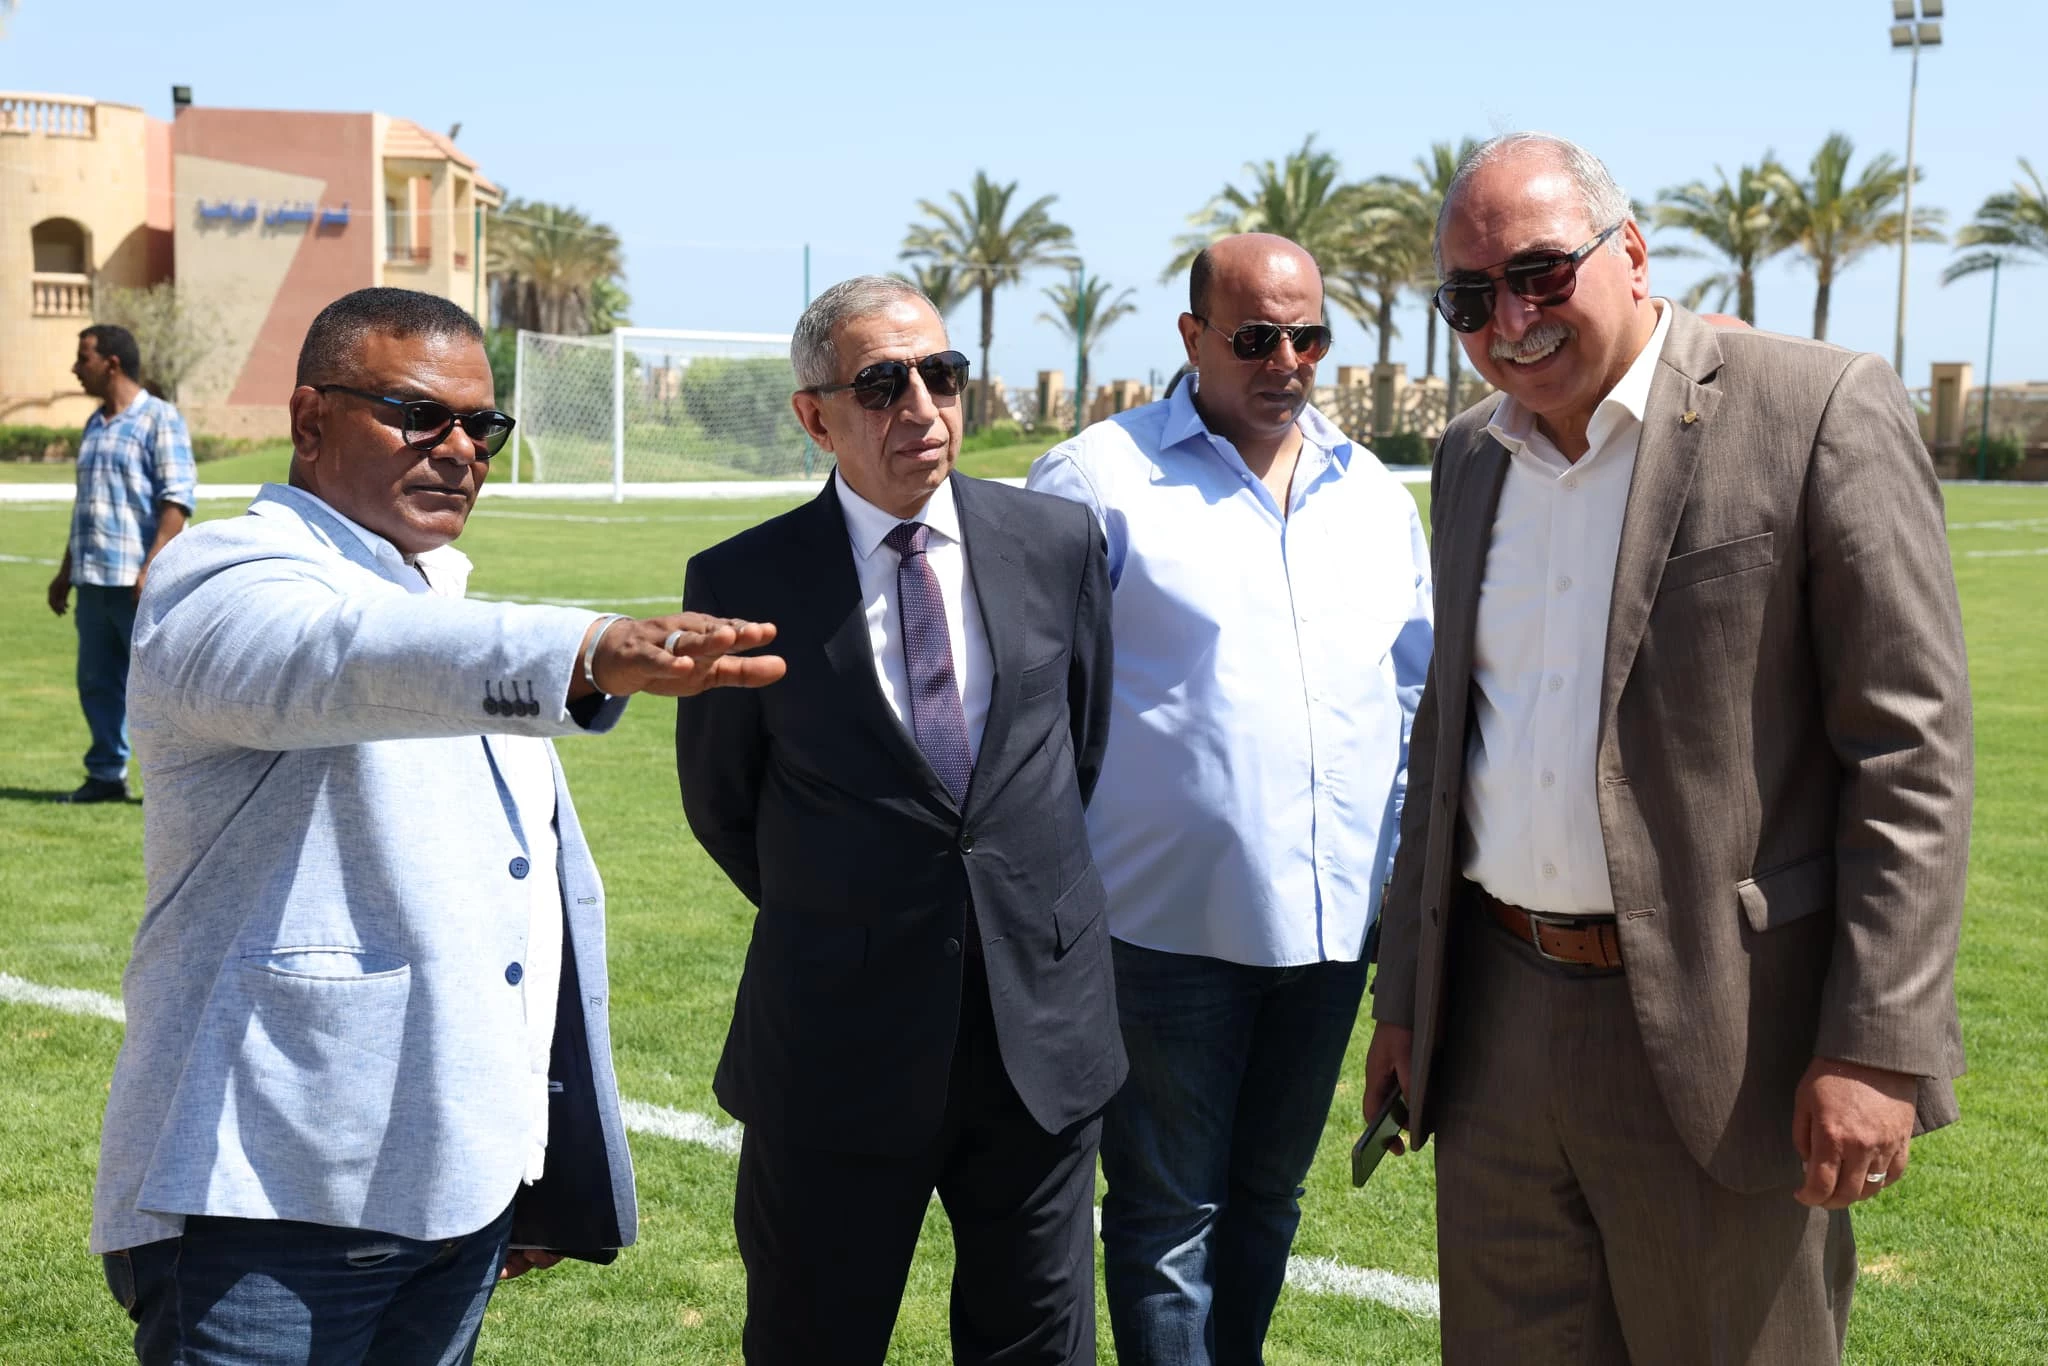 His Excellency Dr. Ismail Abdul Ghaffar, president of the Academy, opened the legal football field and gym at the best level at the Academy branch in Port Fouad on Thursday, 6/6/20243